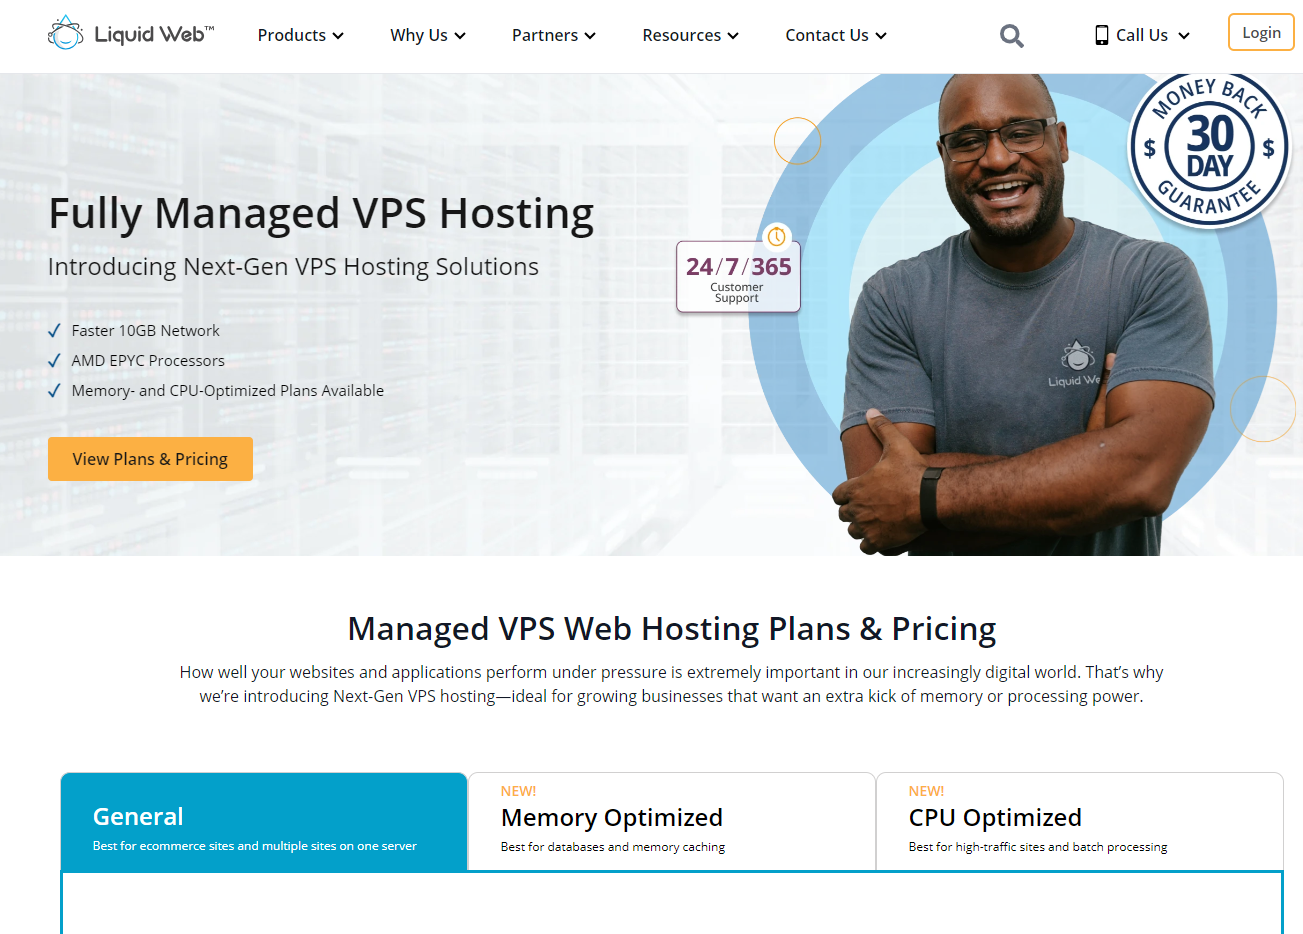 Liquid Web's fully managed VPS hosting page